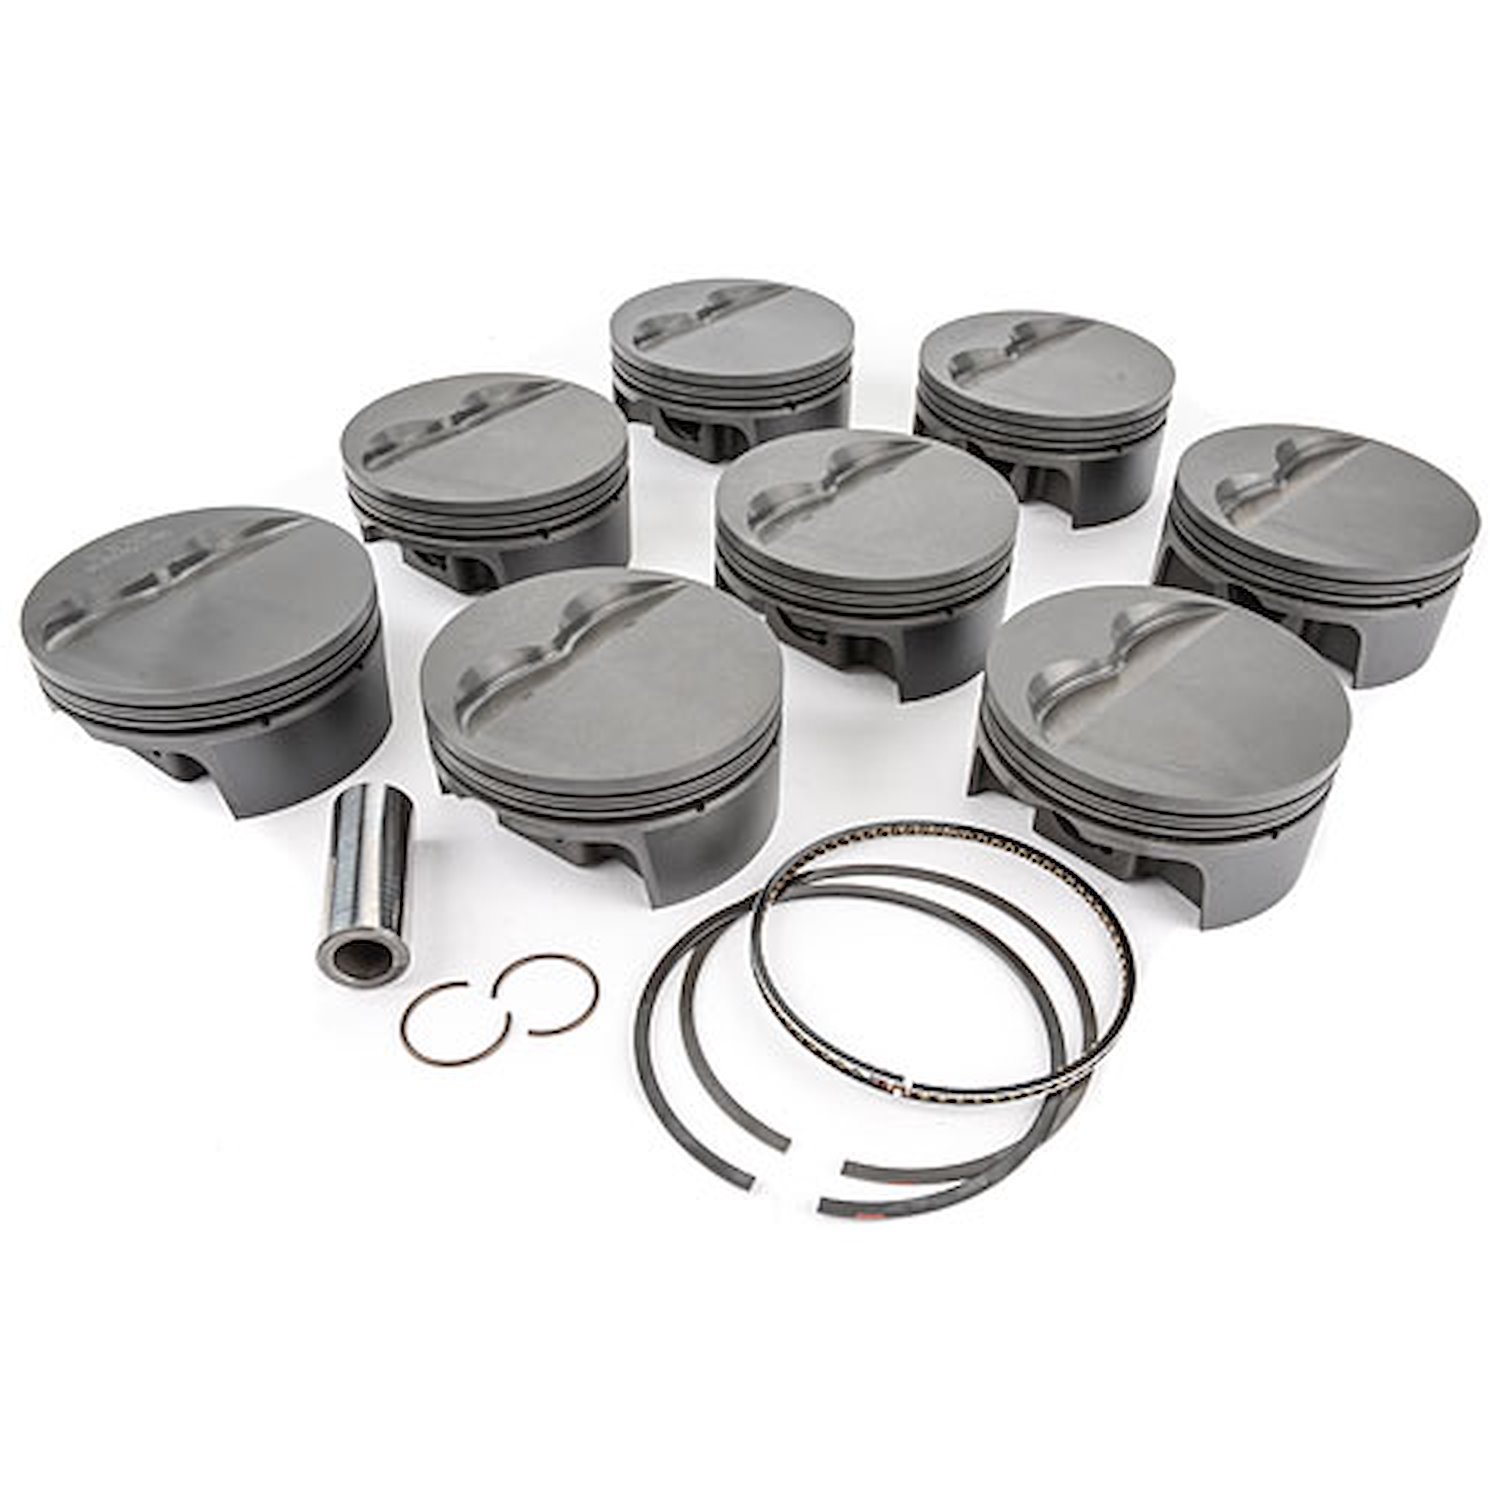 Small Block Chevy PowerPak Piston & Ring Kit Forged 4032 High Silicon Low Expansion Aluminum Alloy